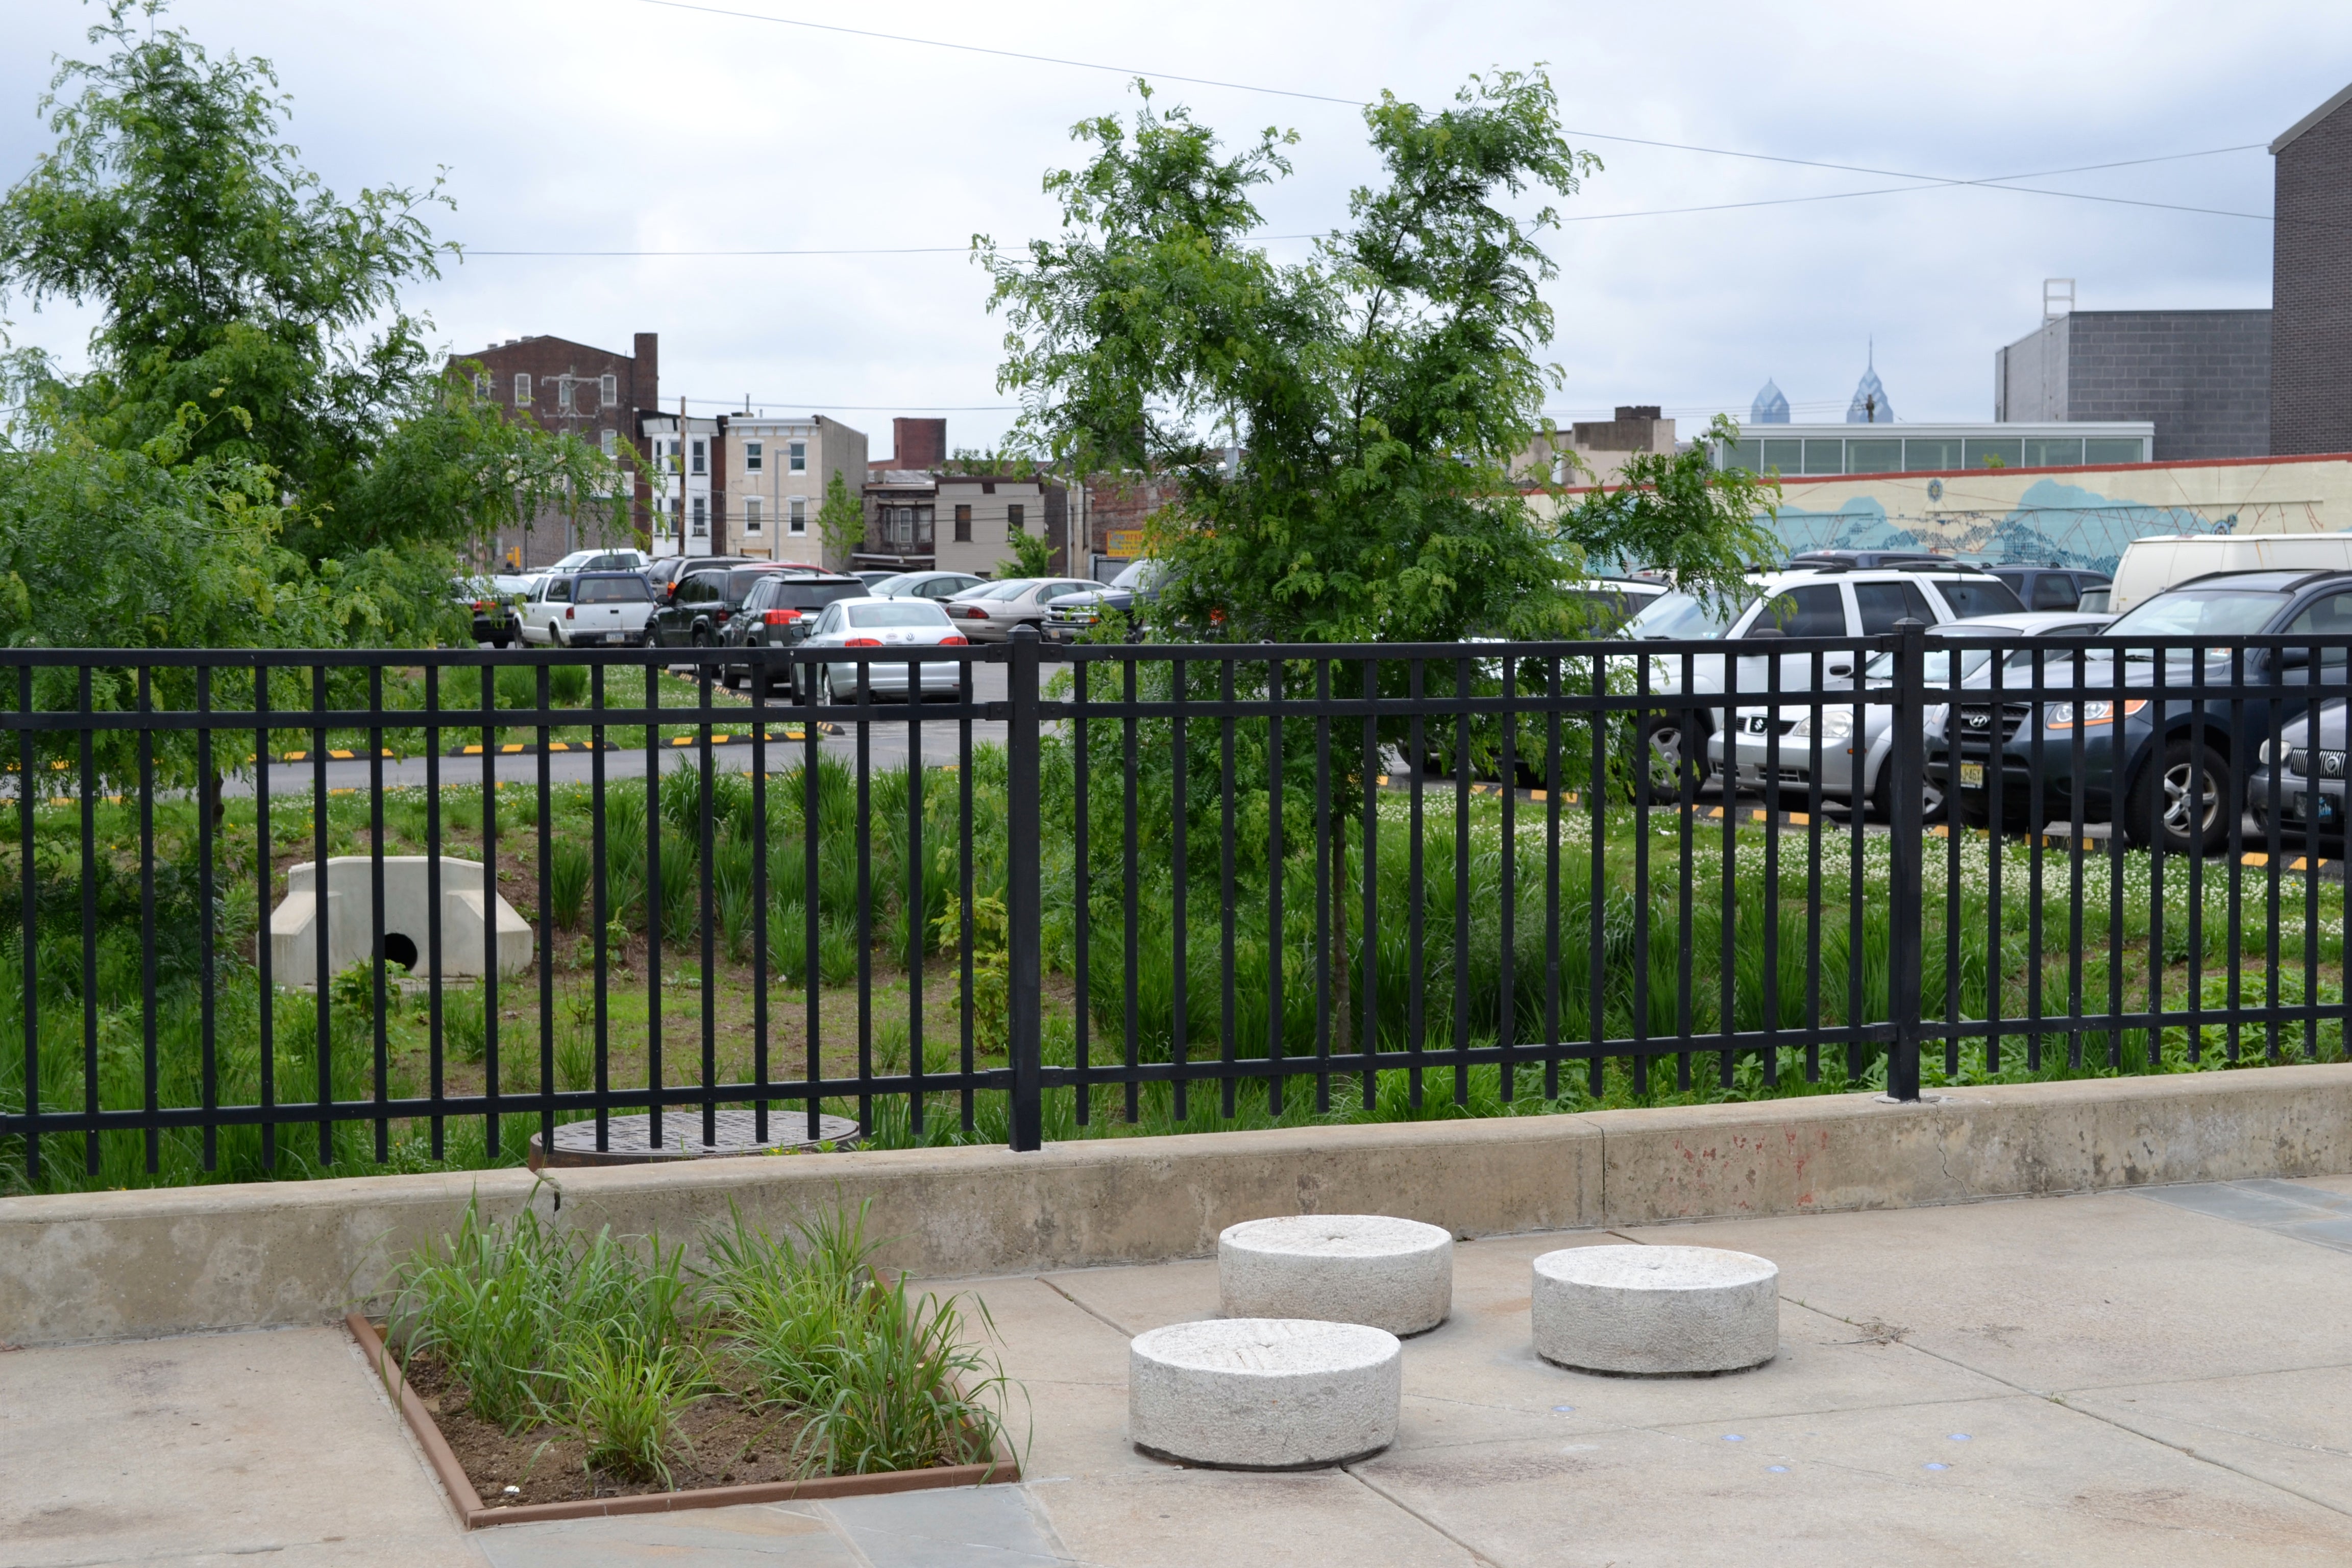 The sprayground backs up to a stormwater management trench installed by the Philadelphia Water Department